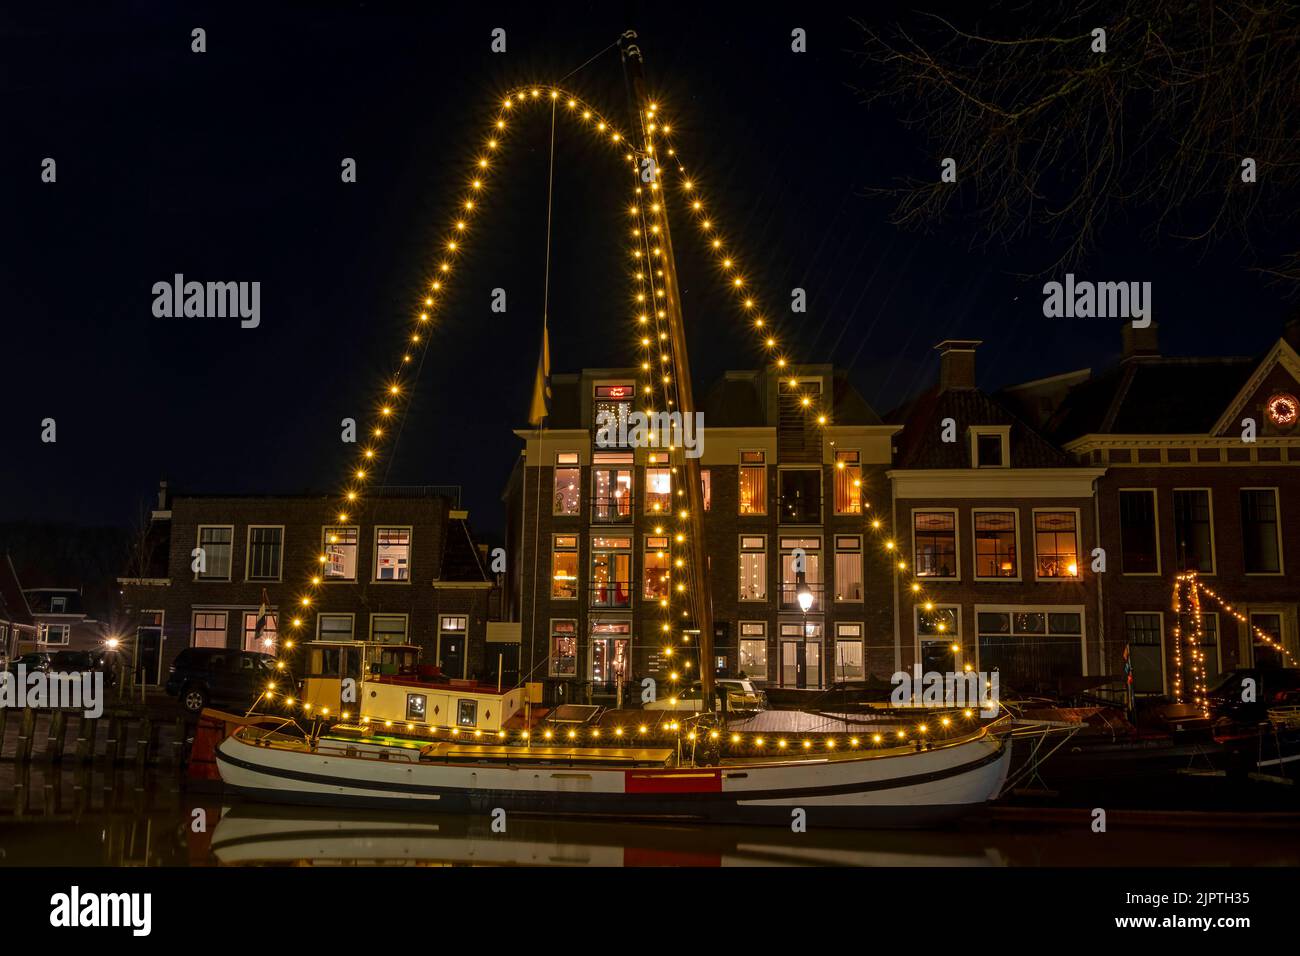 Decorated traditional sailing boats in the harbor from Harlingen in the Netherlands at night Stock Photo